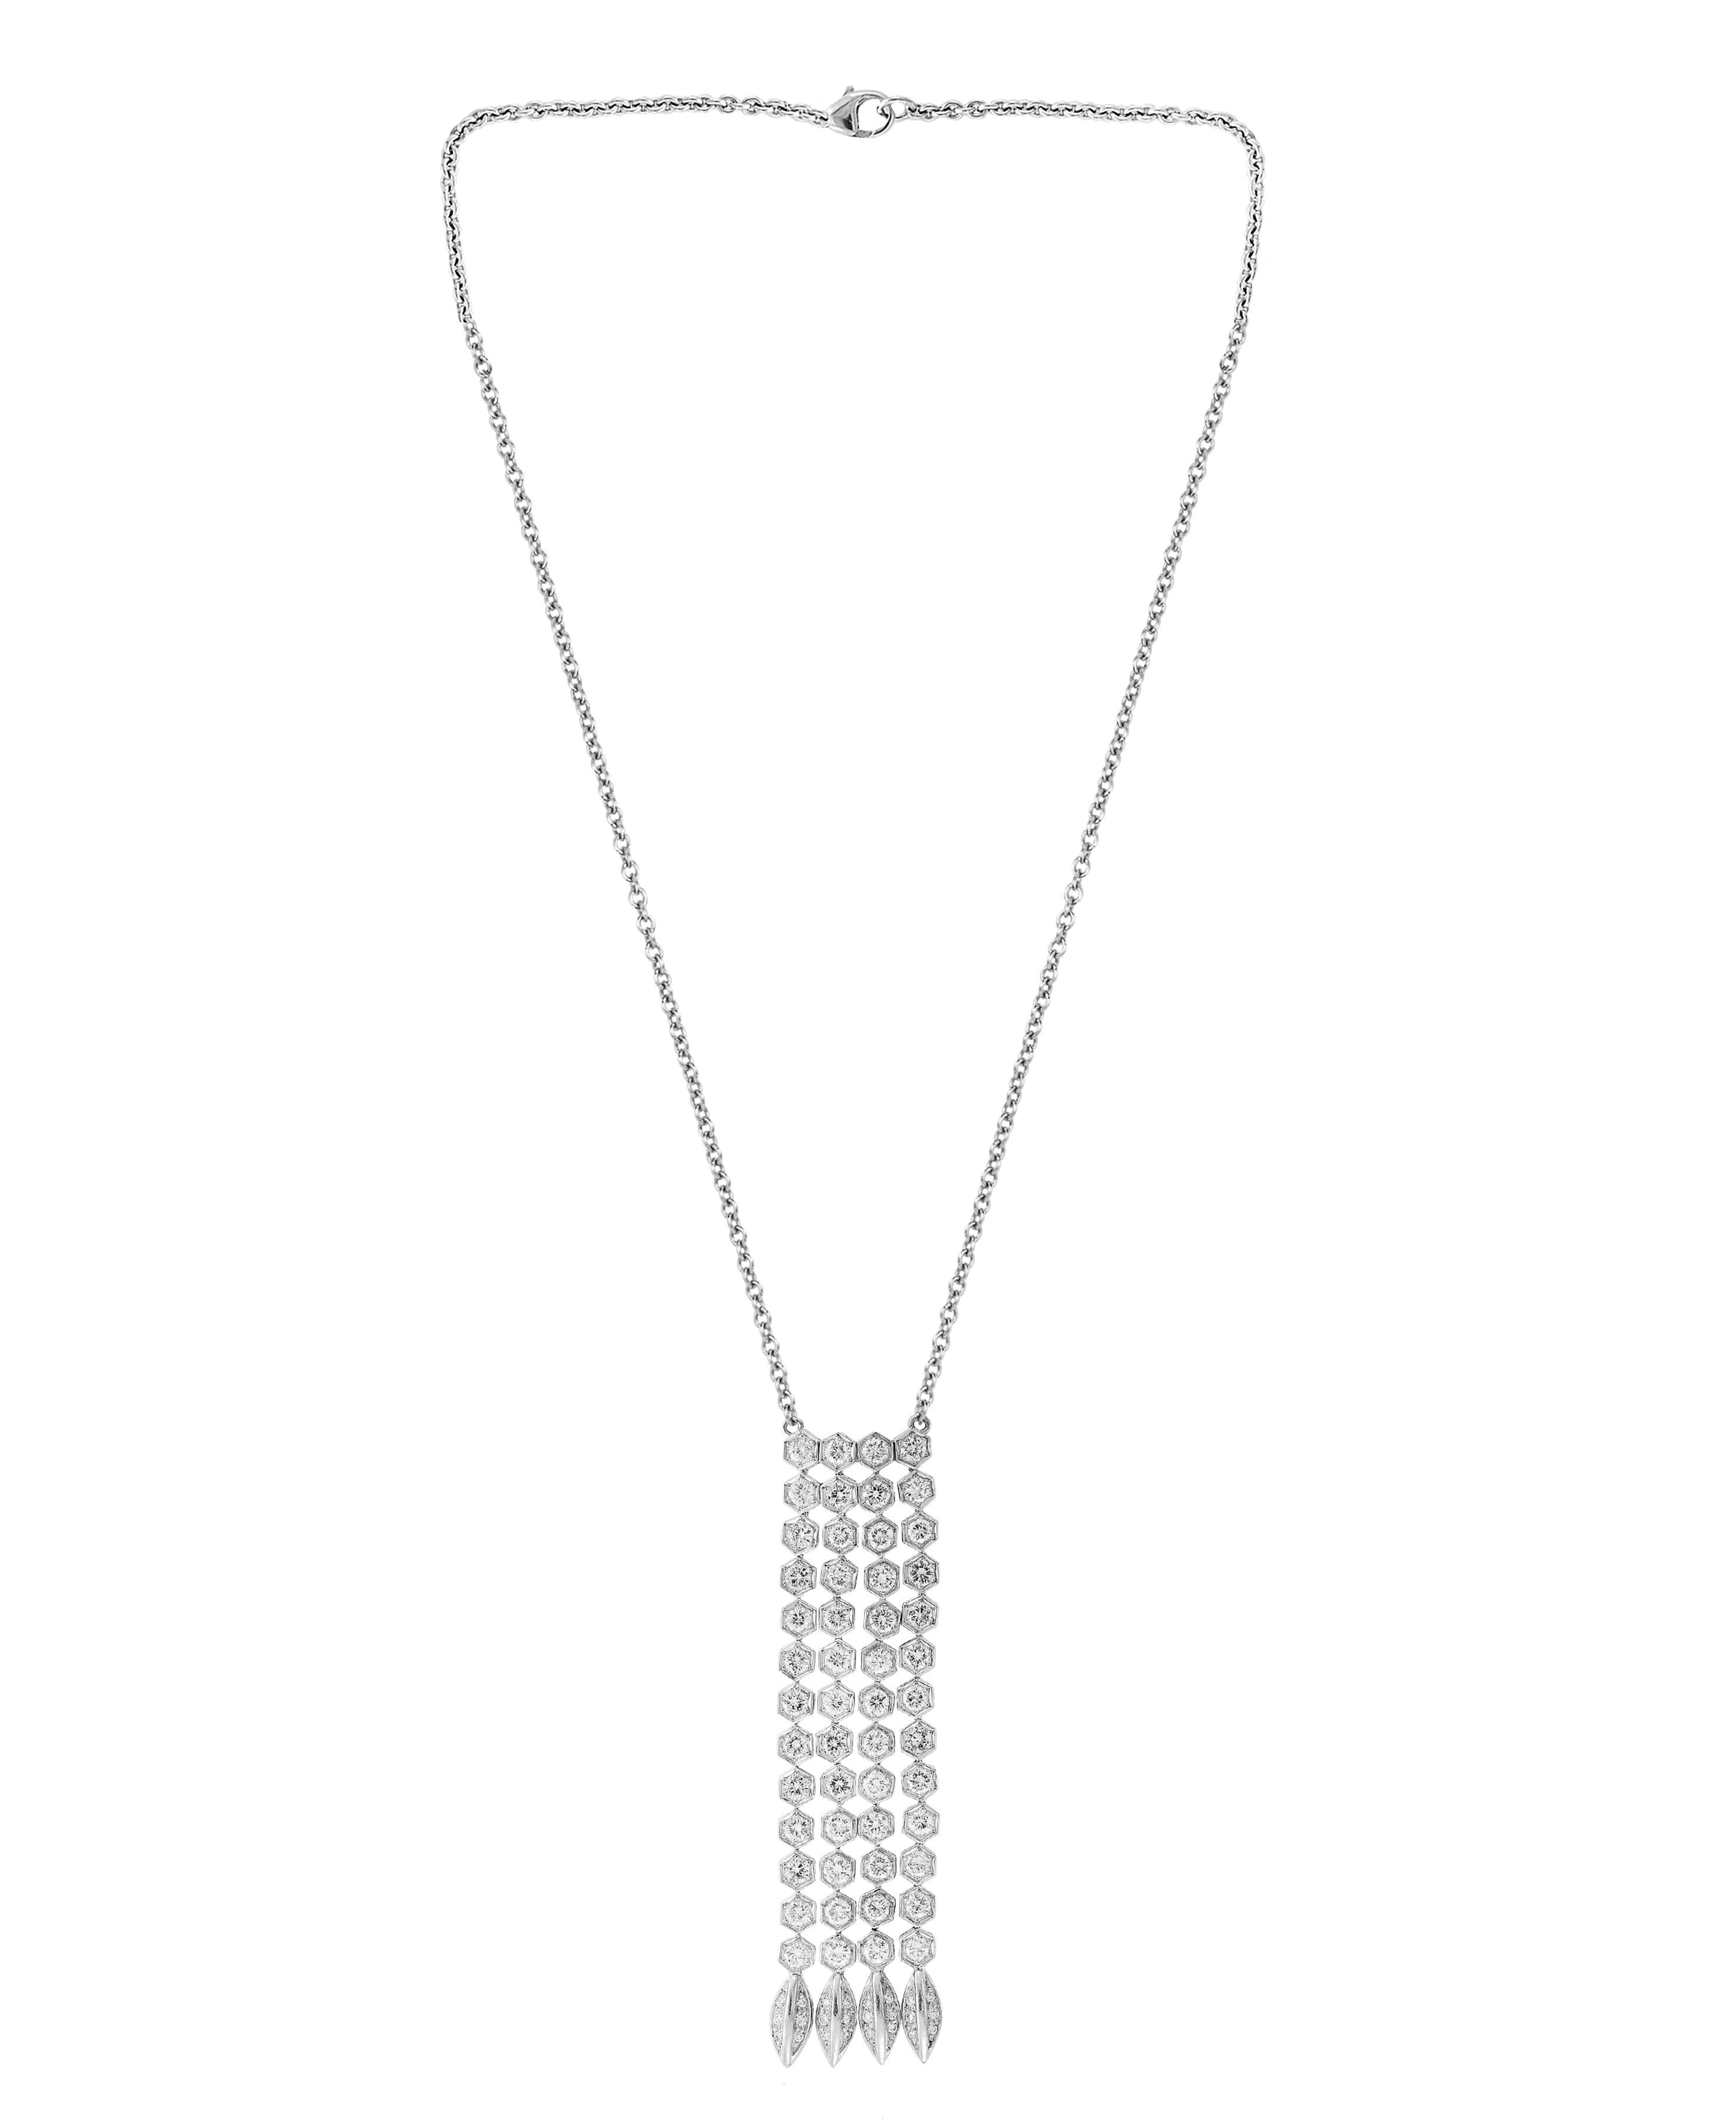 Women's 12 Carat Diamond Line Necklace and Line Earring Suite in 18 Karat White Gold